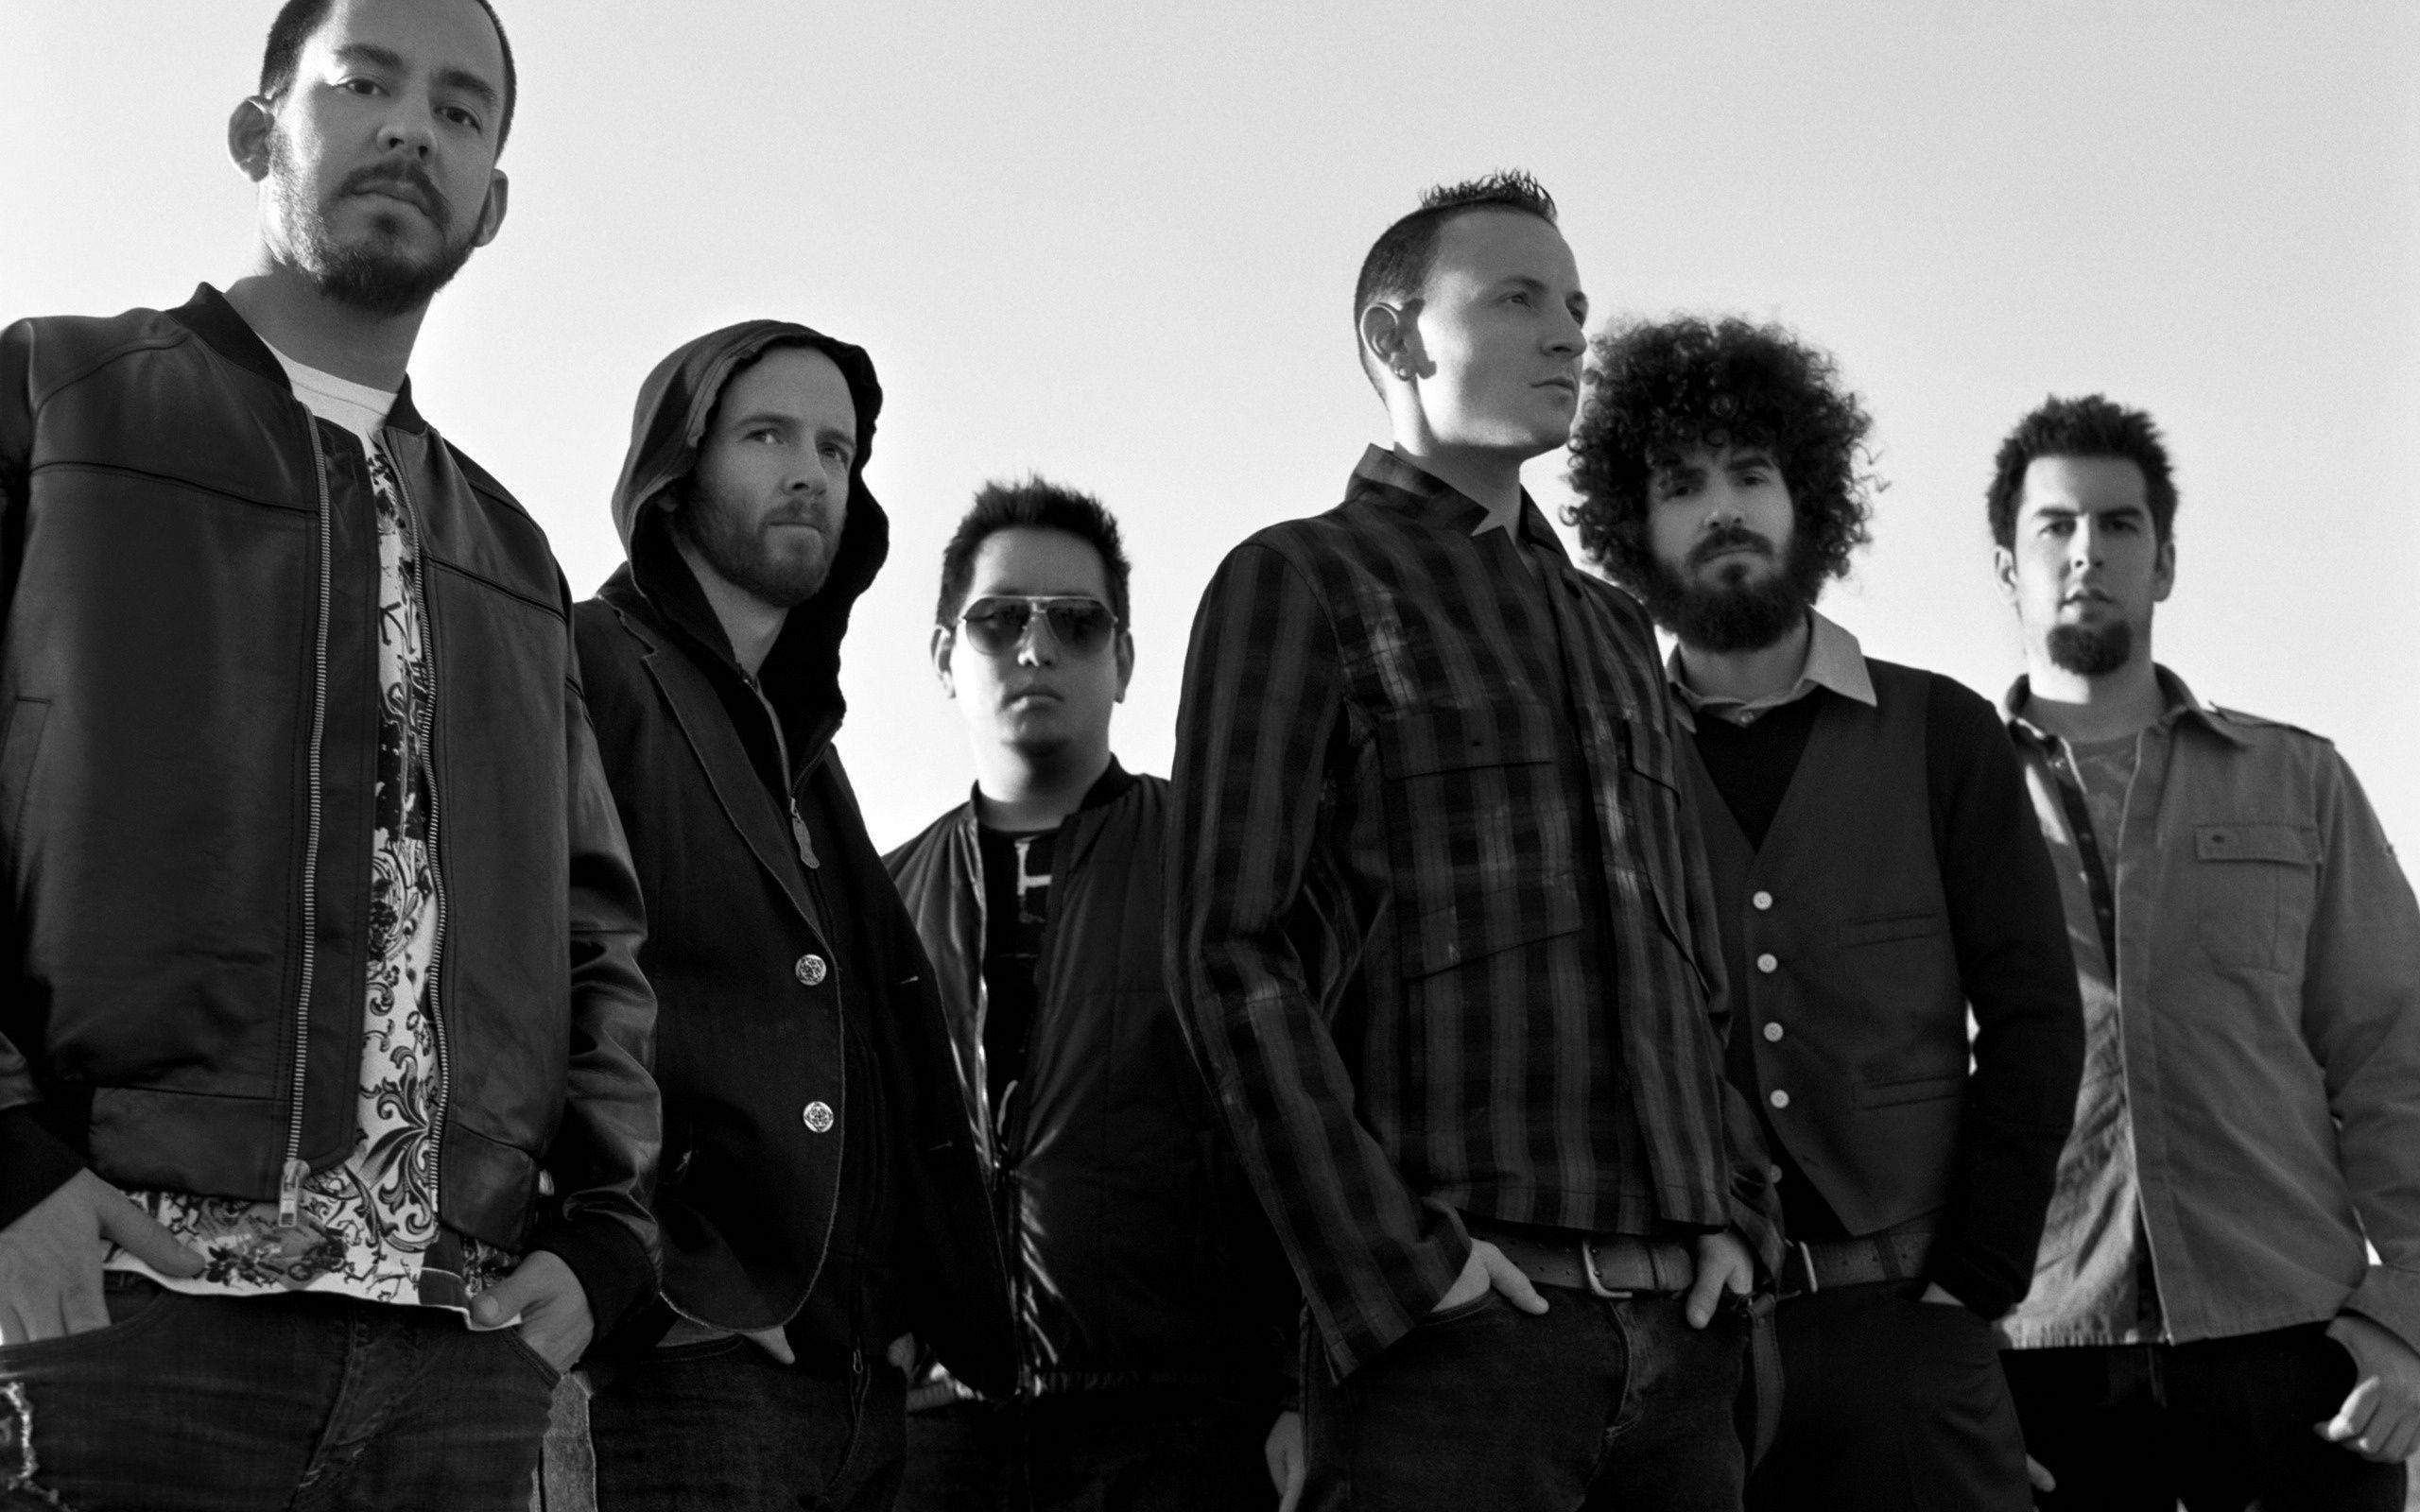 Mike, Band, Lp, Linkin Park Wallpaper and Picture